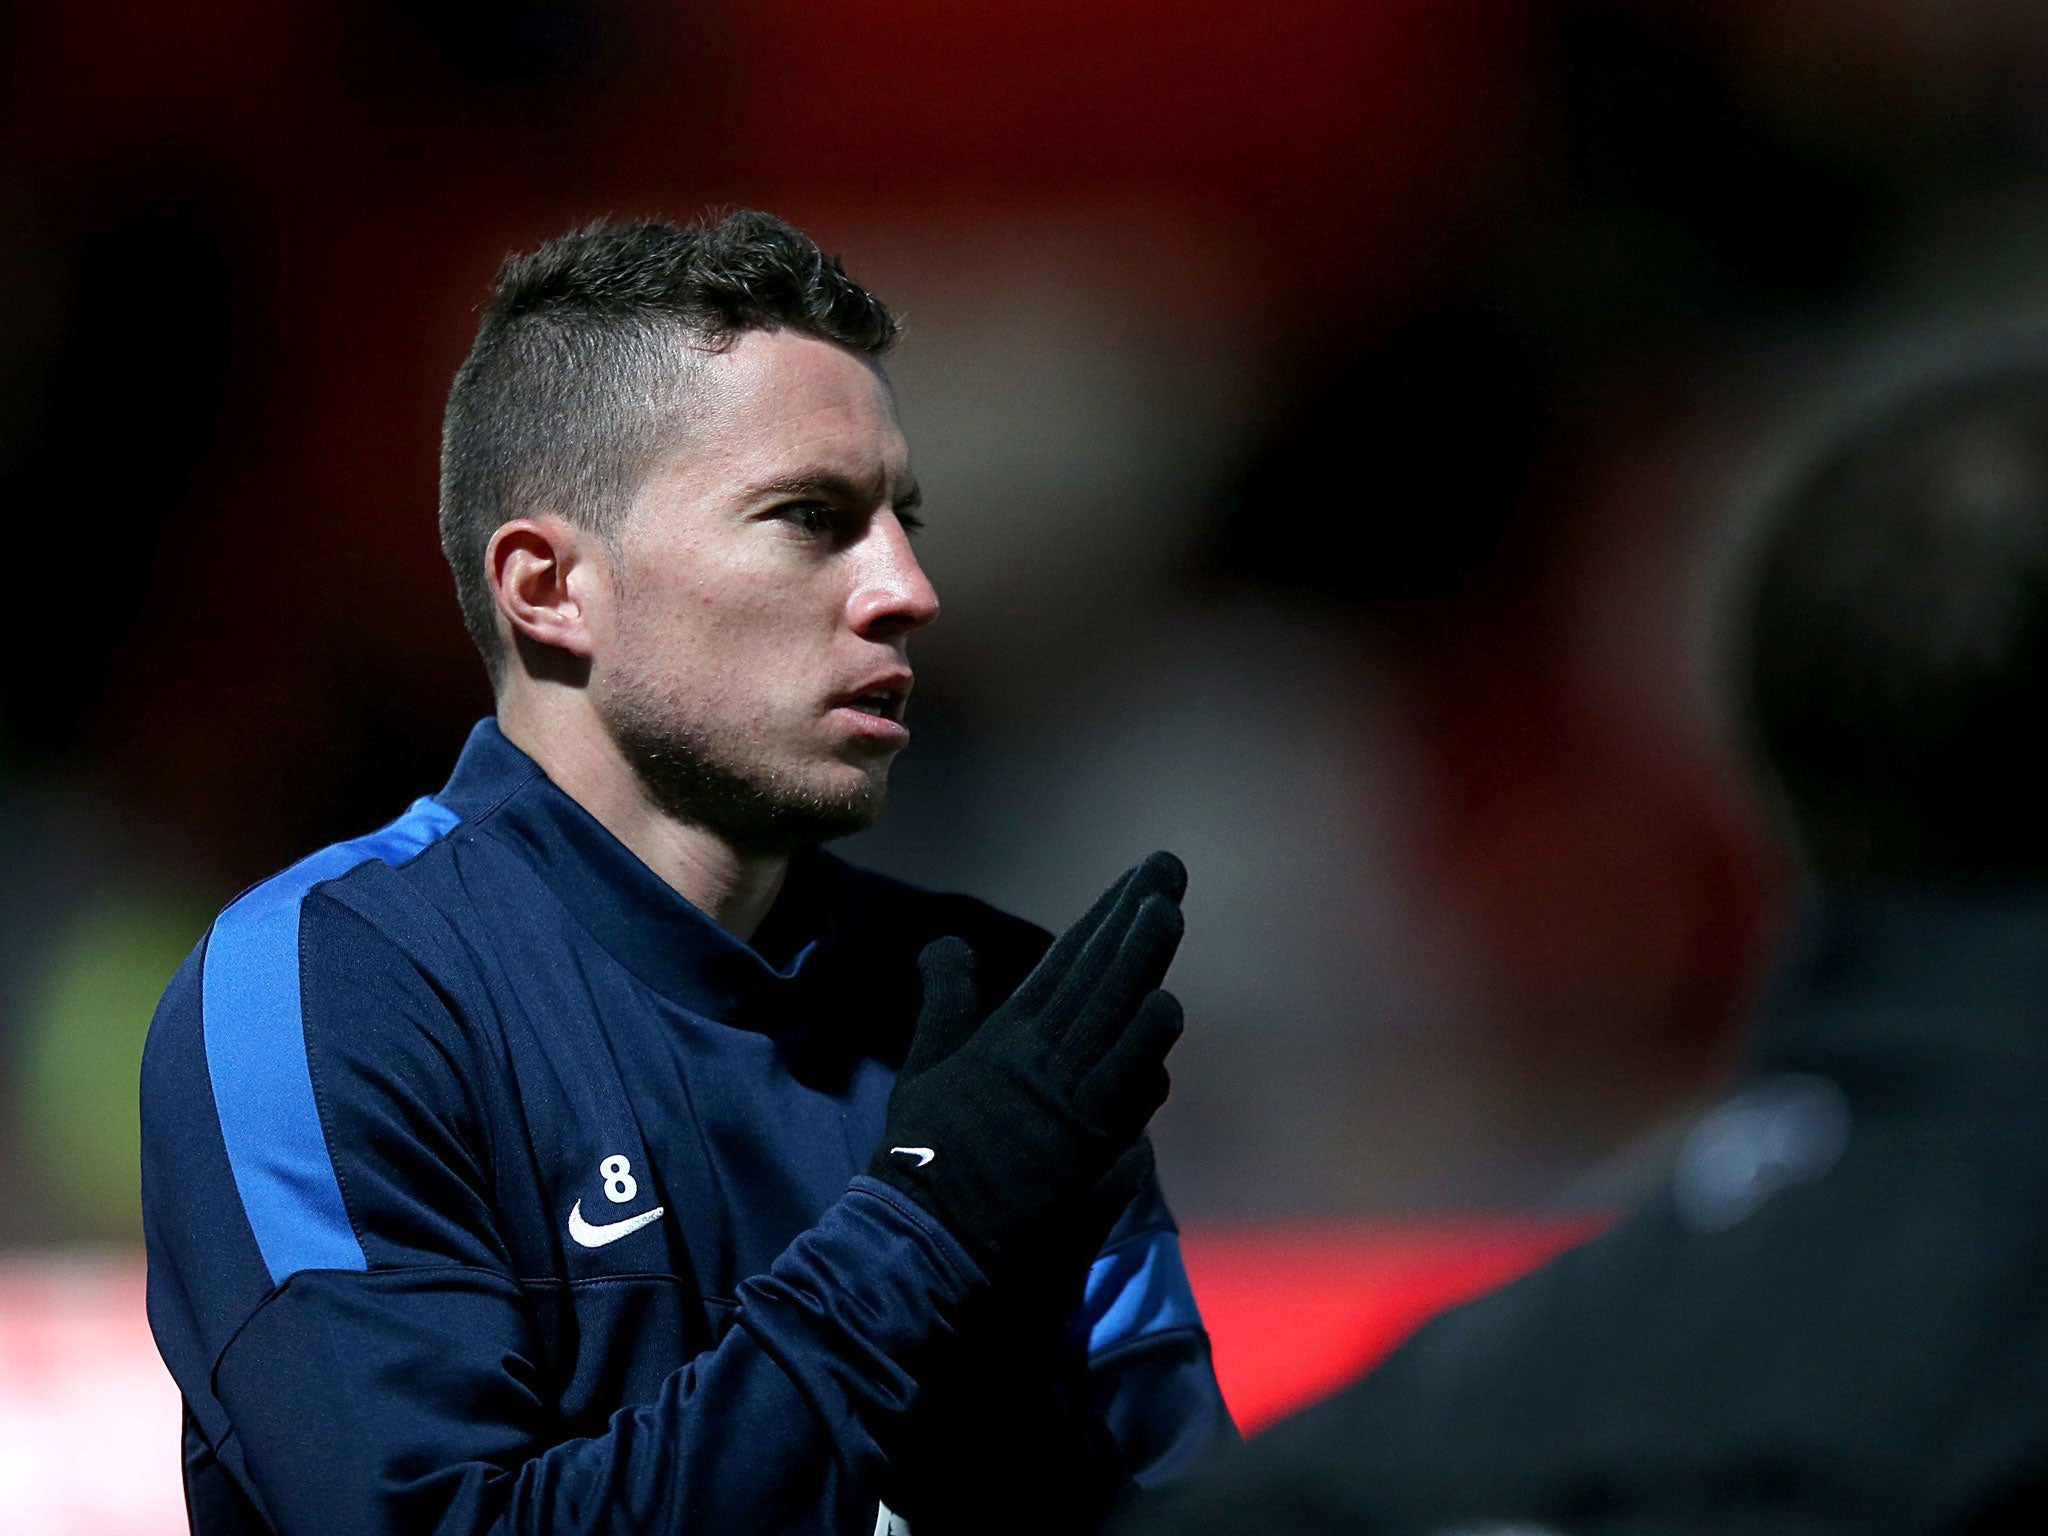 Bryan Oviedo suffered a double leg break in stretching to make a recovering challenge